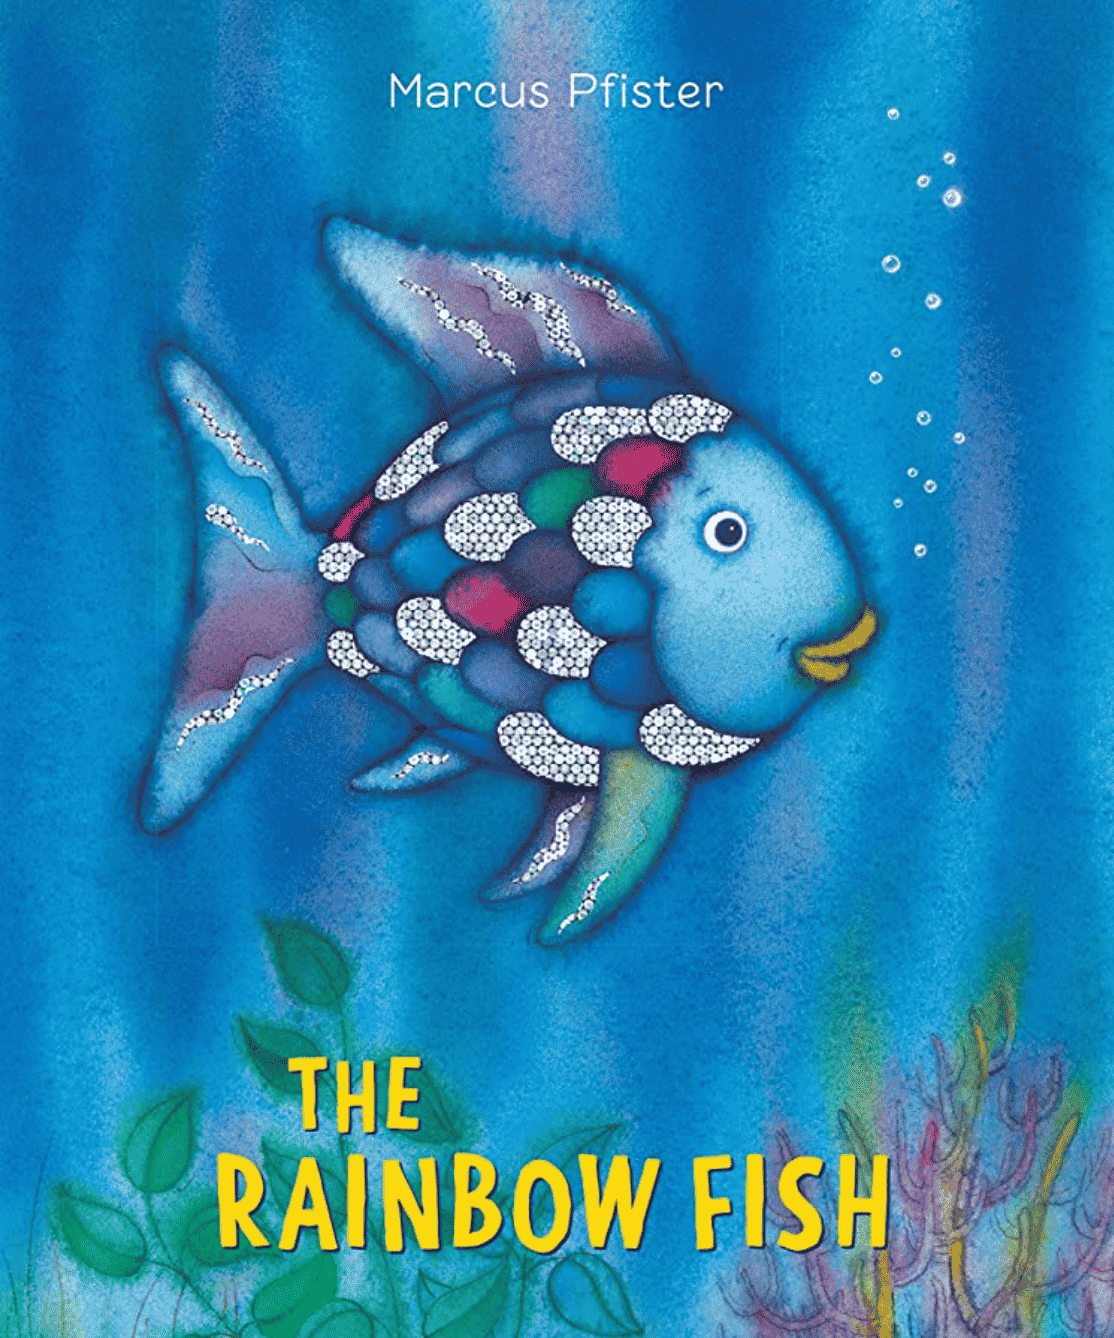 https://bram-adams.ghost.io/content/images/2023/04/rainbow-fish-cover.png